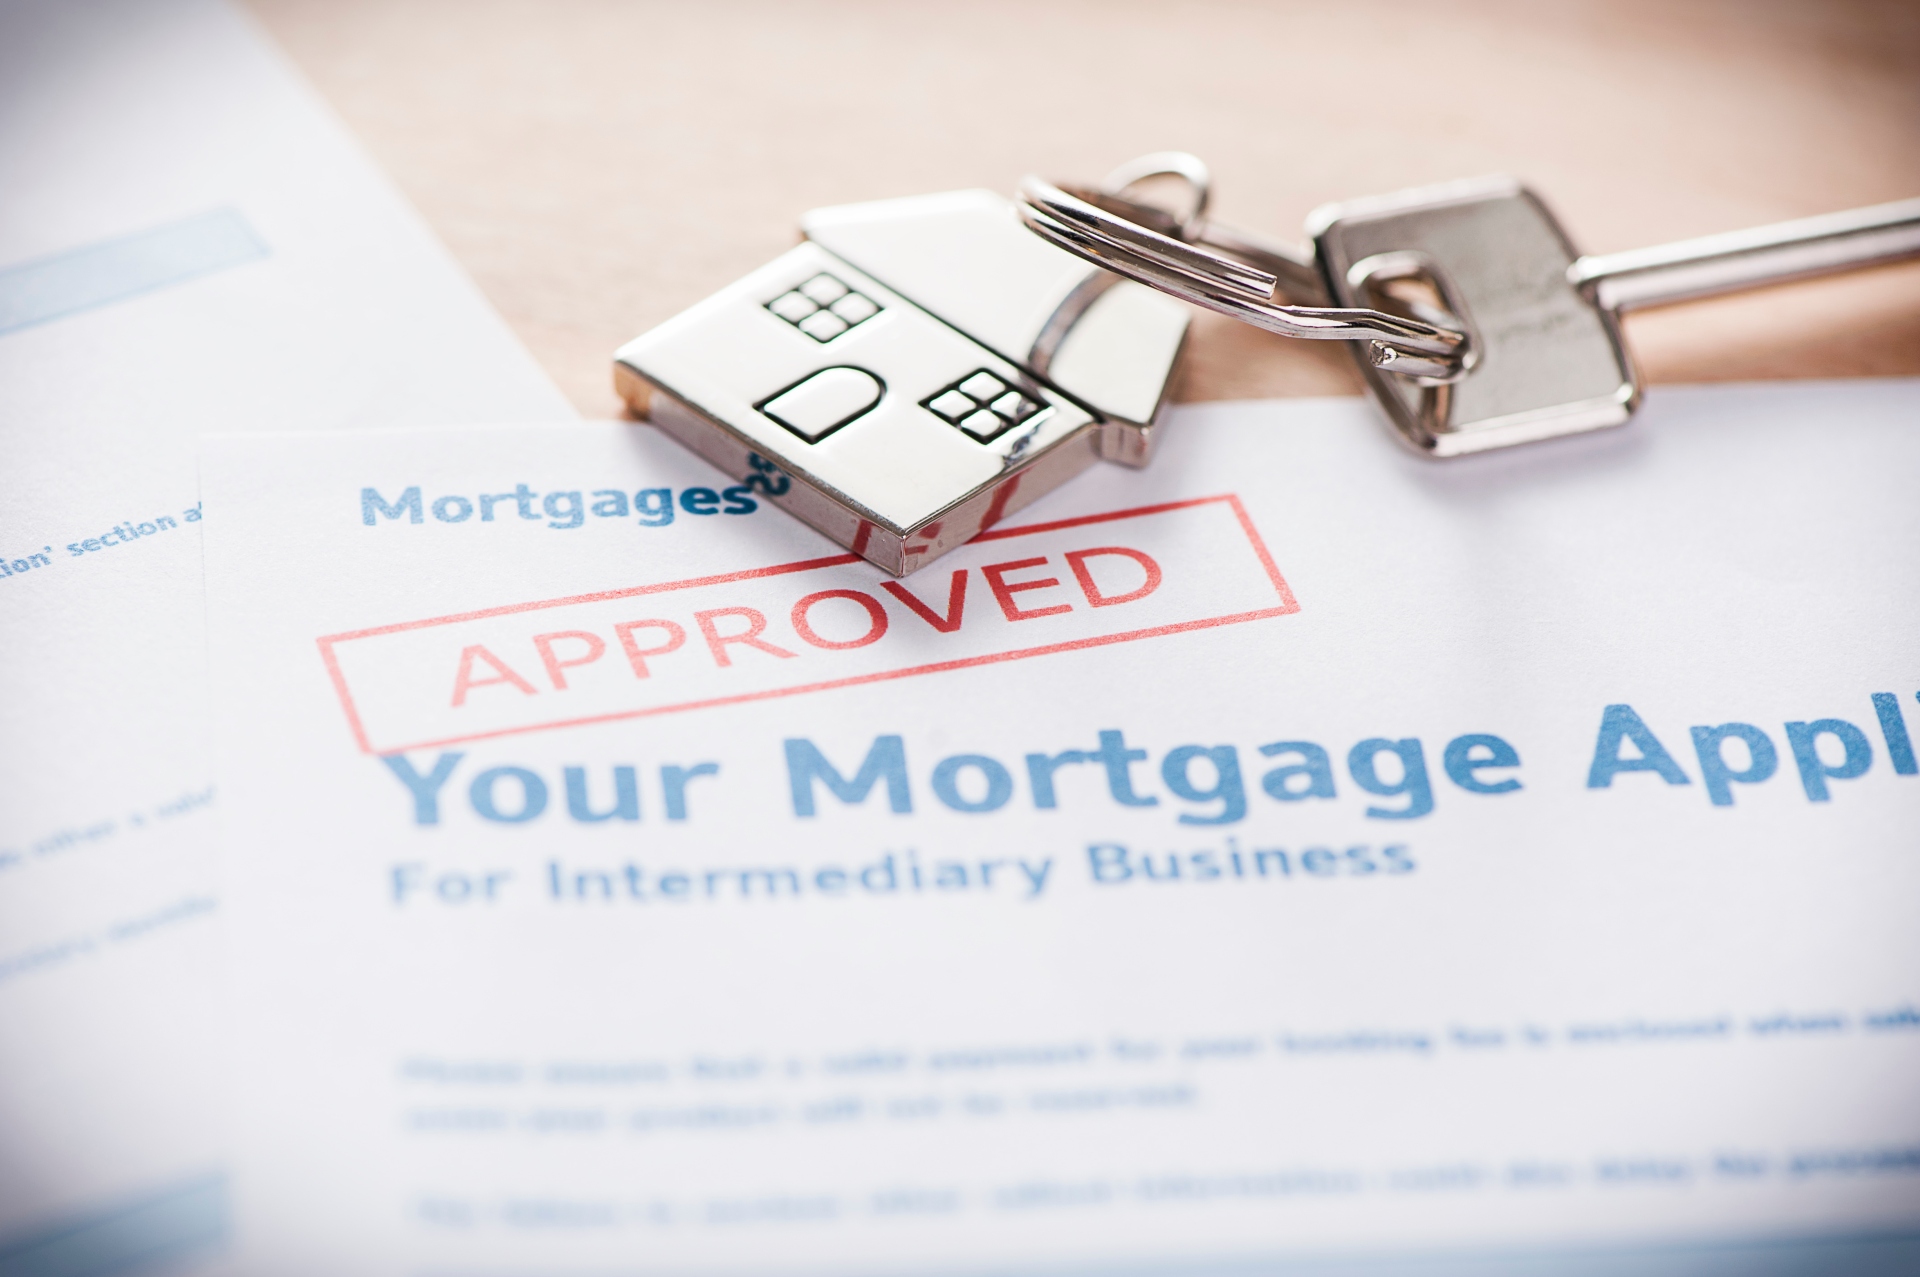 Homebuyers getting approved for the type of home loan they applied for